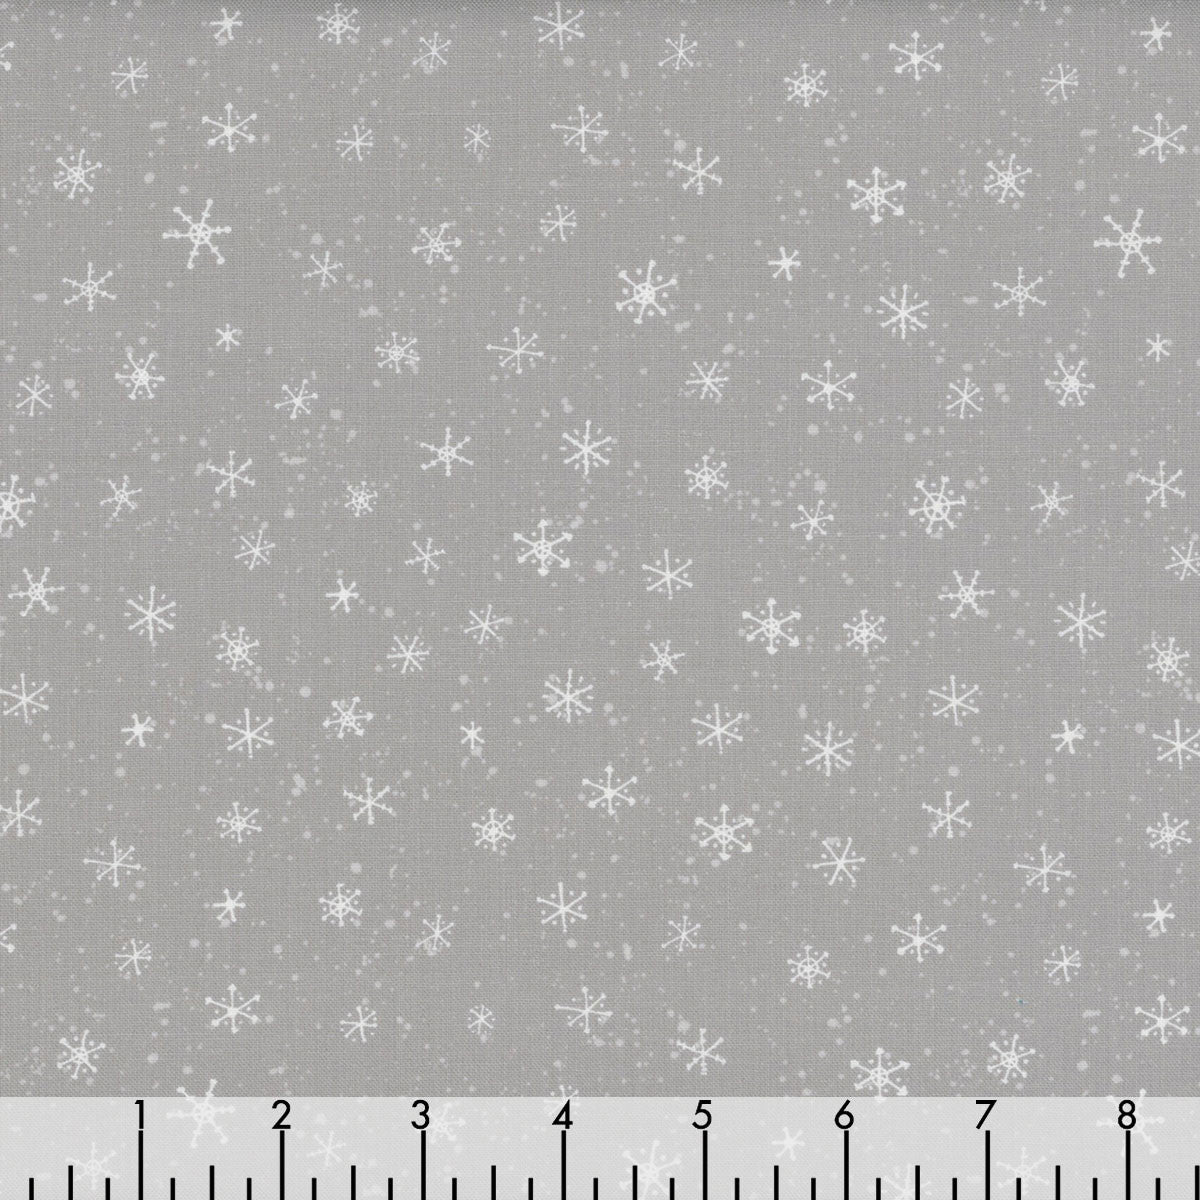 44 x 36 Baby It's Gnomes Out Snow All Over Grey Wilmington Prints 100% Cotton Christmas